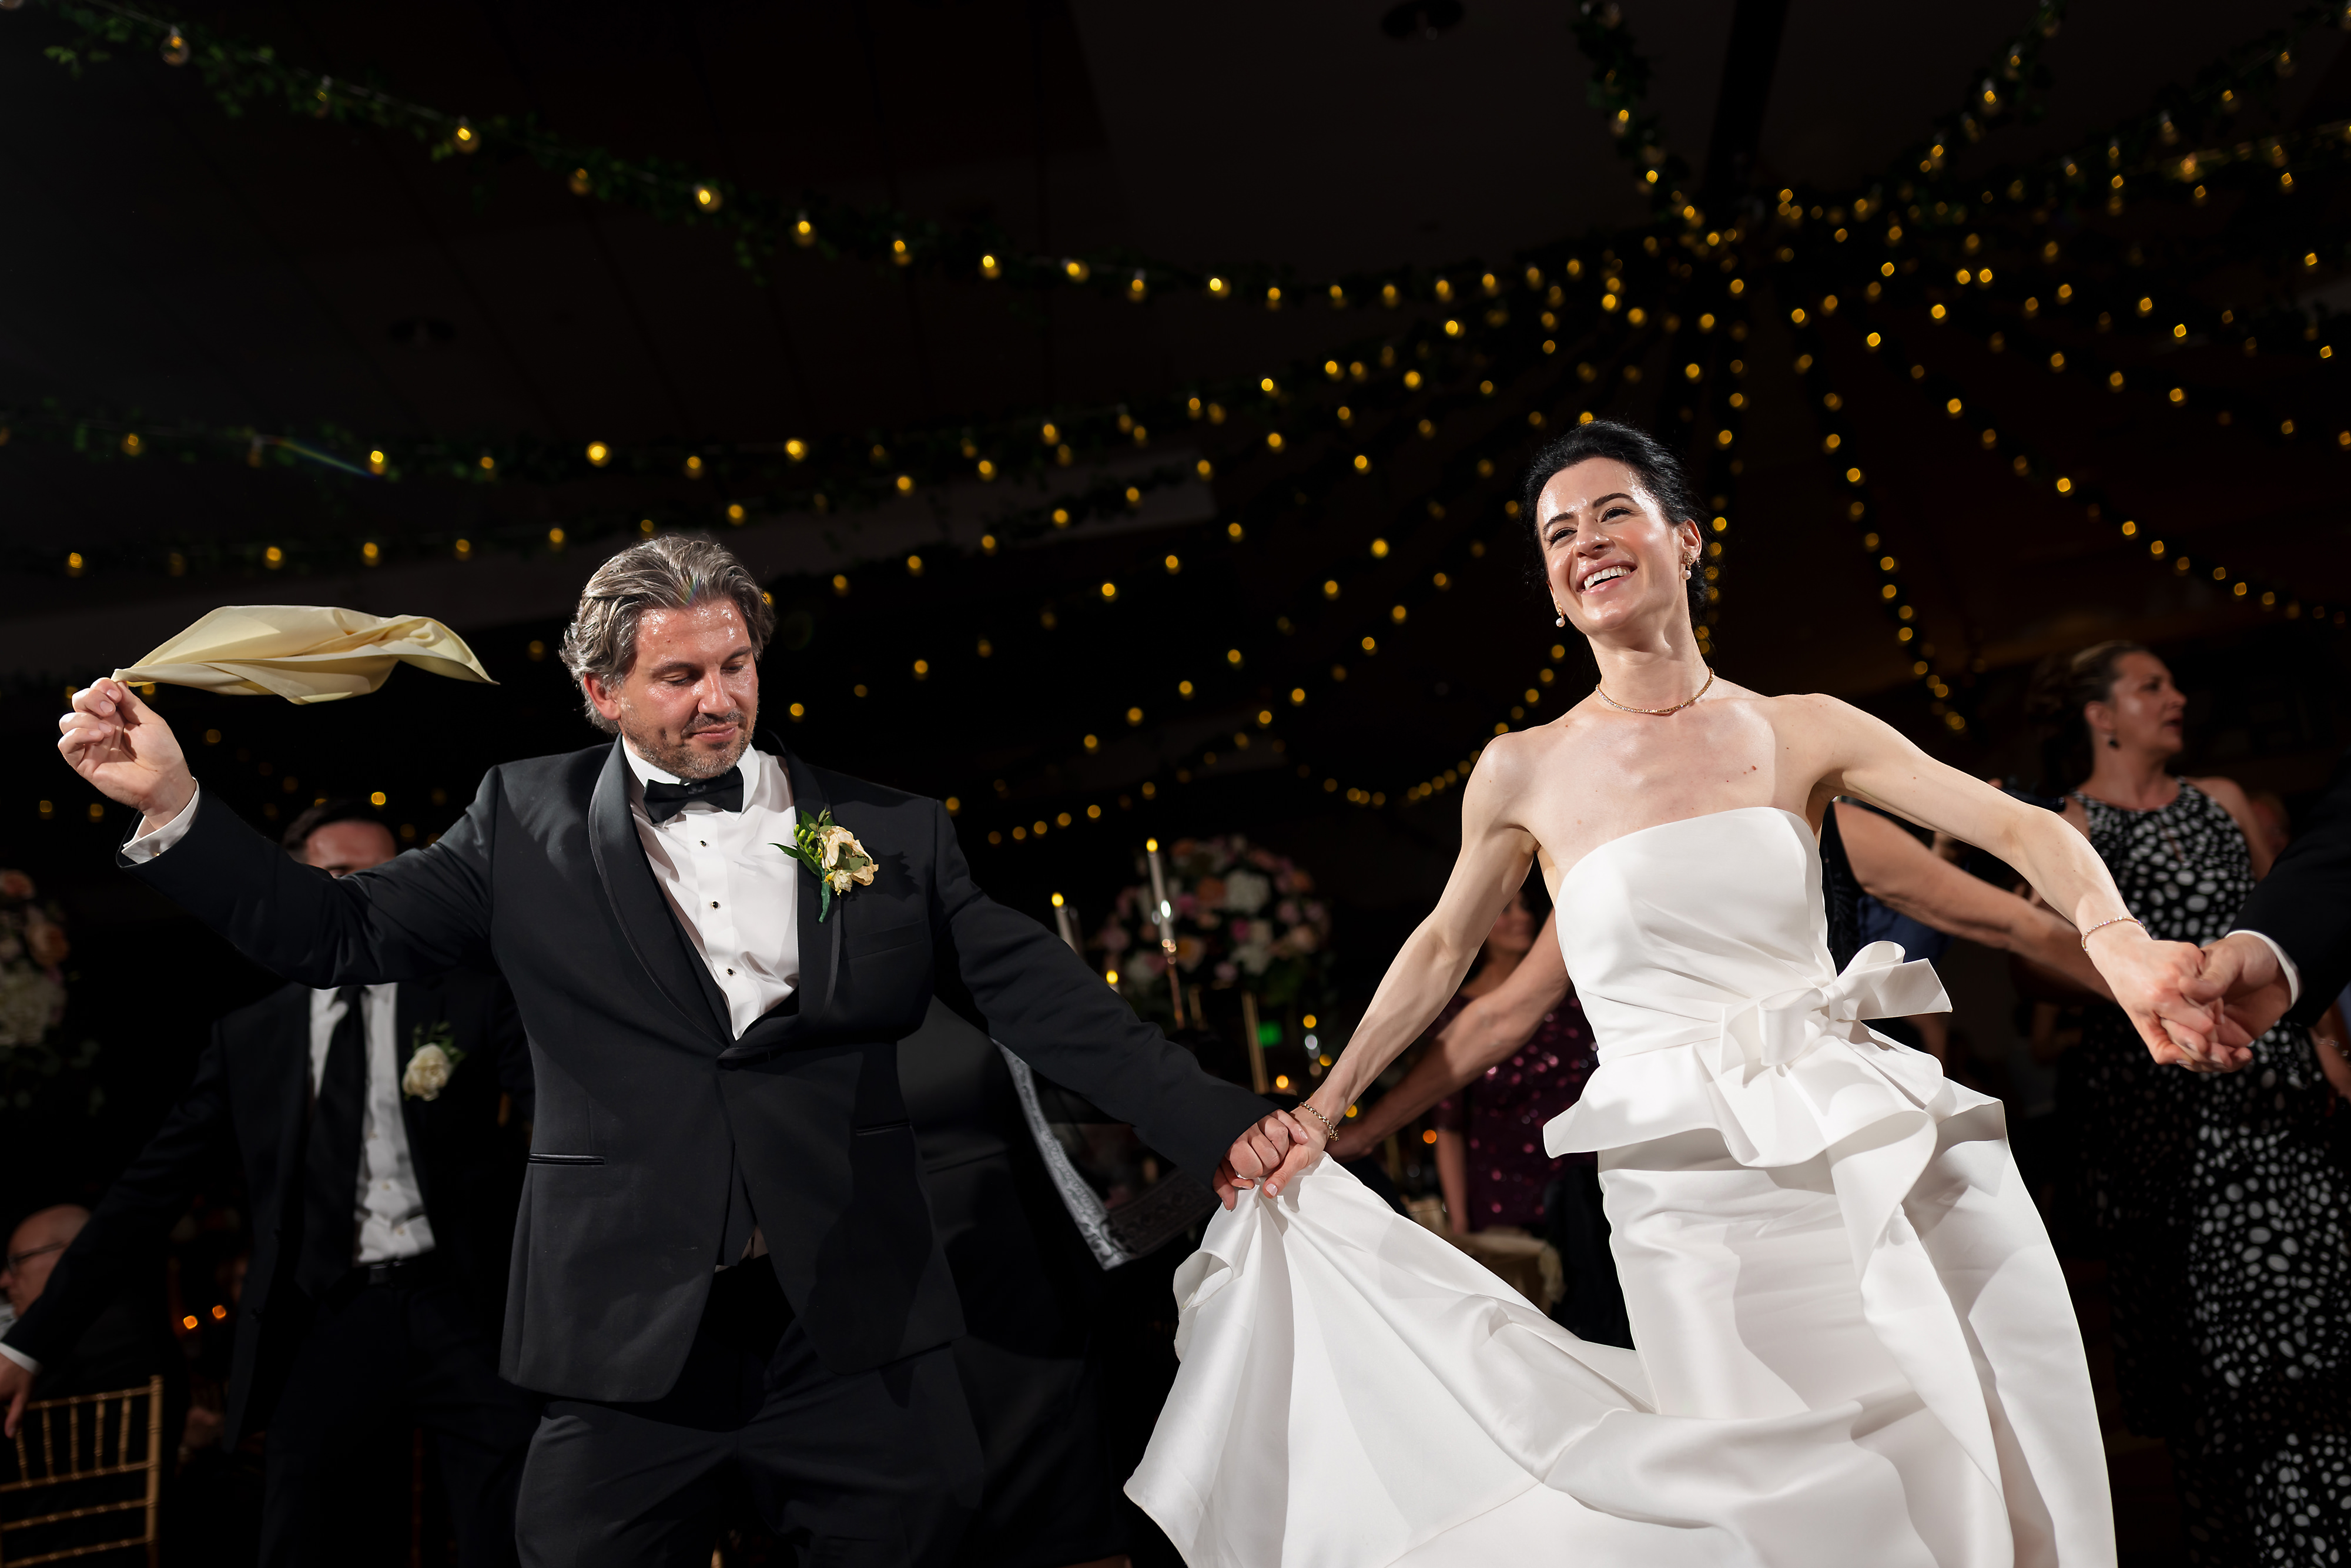 Bride and groom dance during reception at Halls of St. George